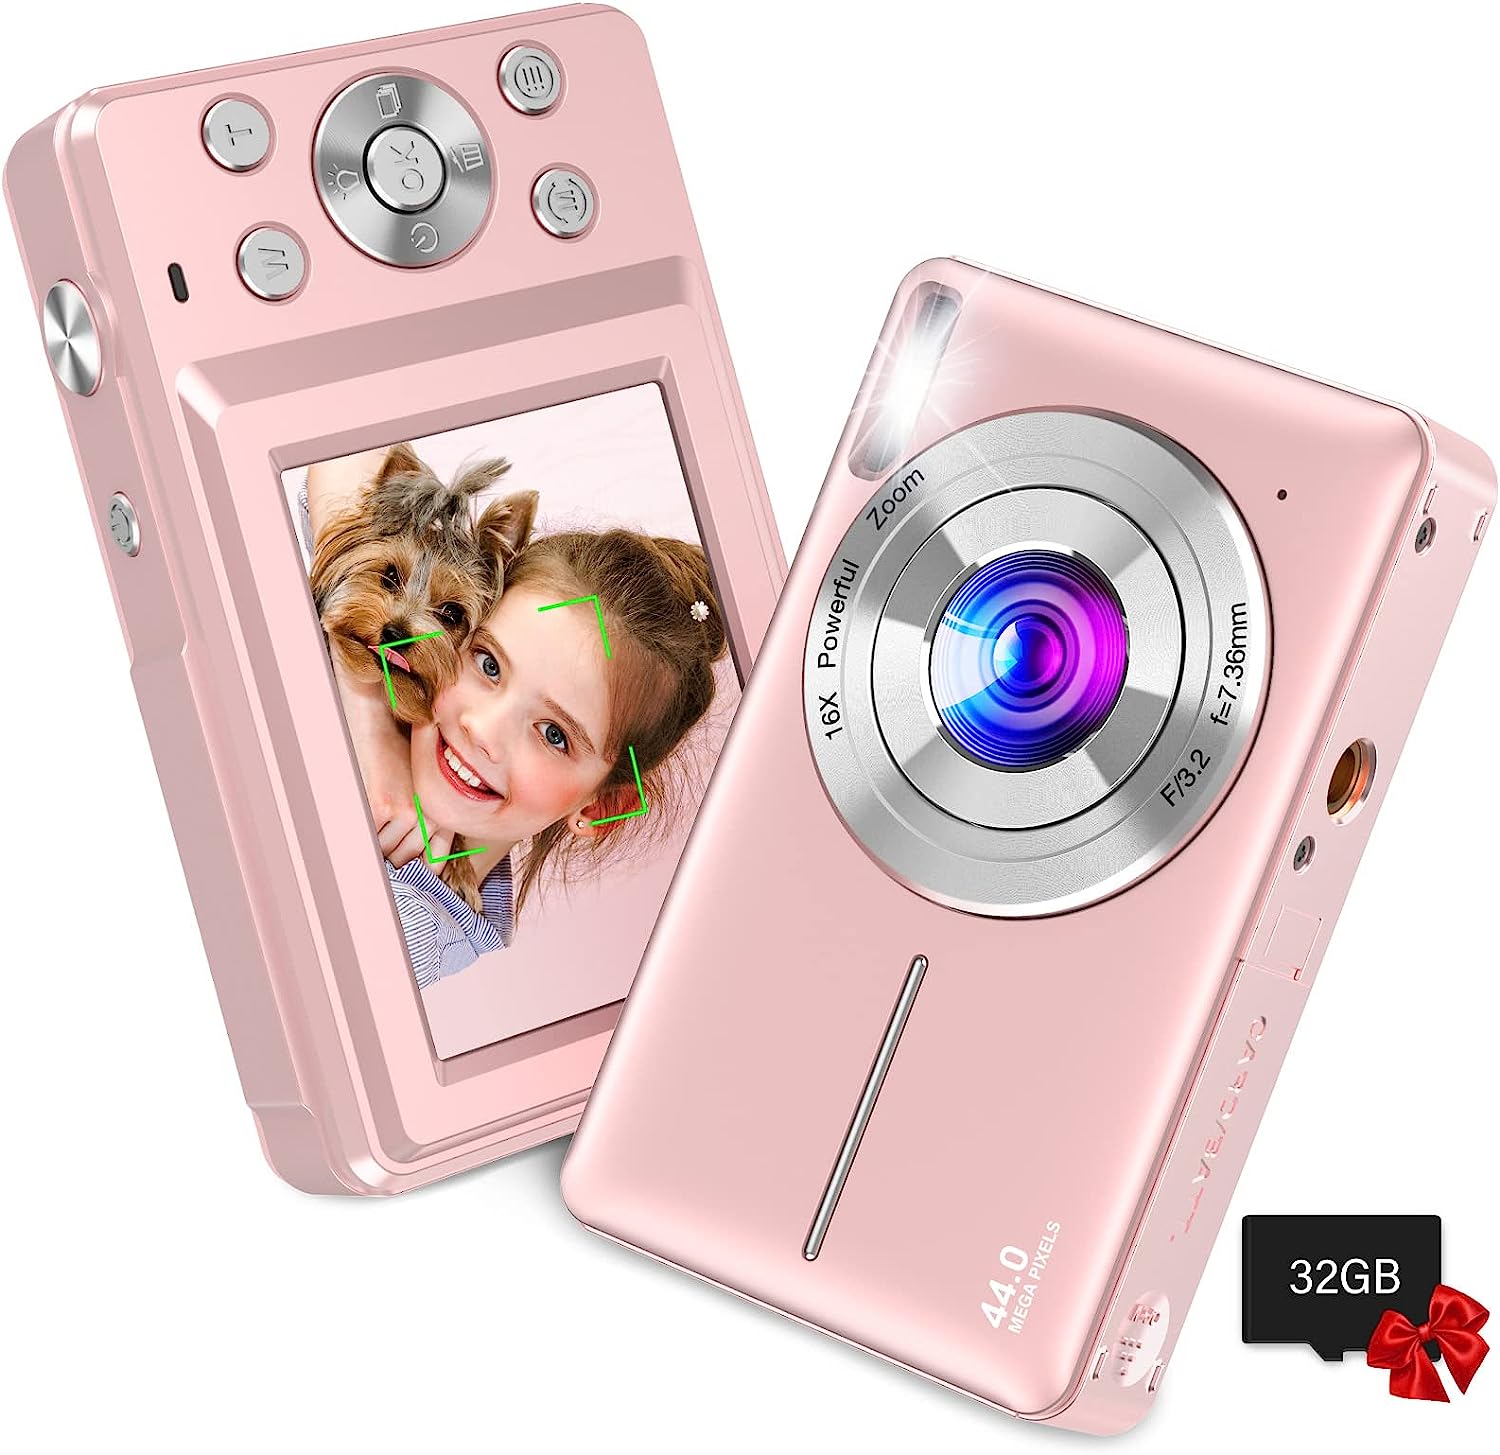 Digital Kids Camera with 32GB Card, Nsoela FHD 1080P 44MP Compact For Vlogging, Point and Shoot 16X Zoom, Portable Mini Kids for Teens Students